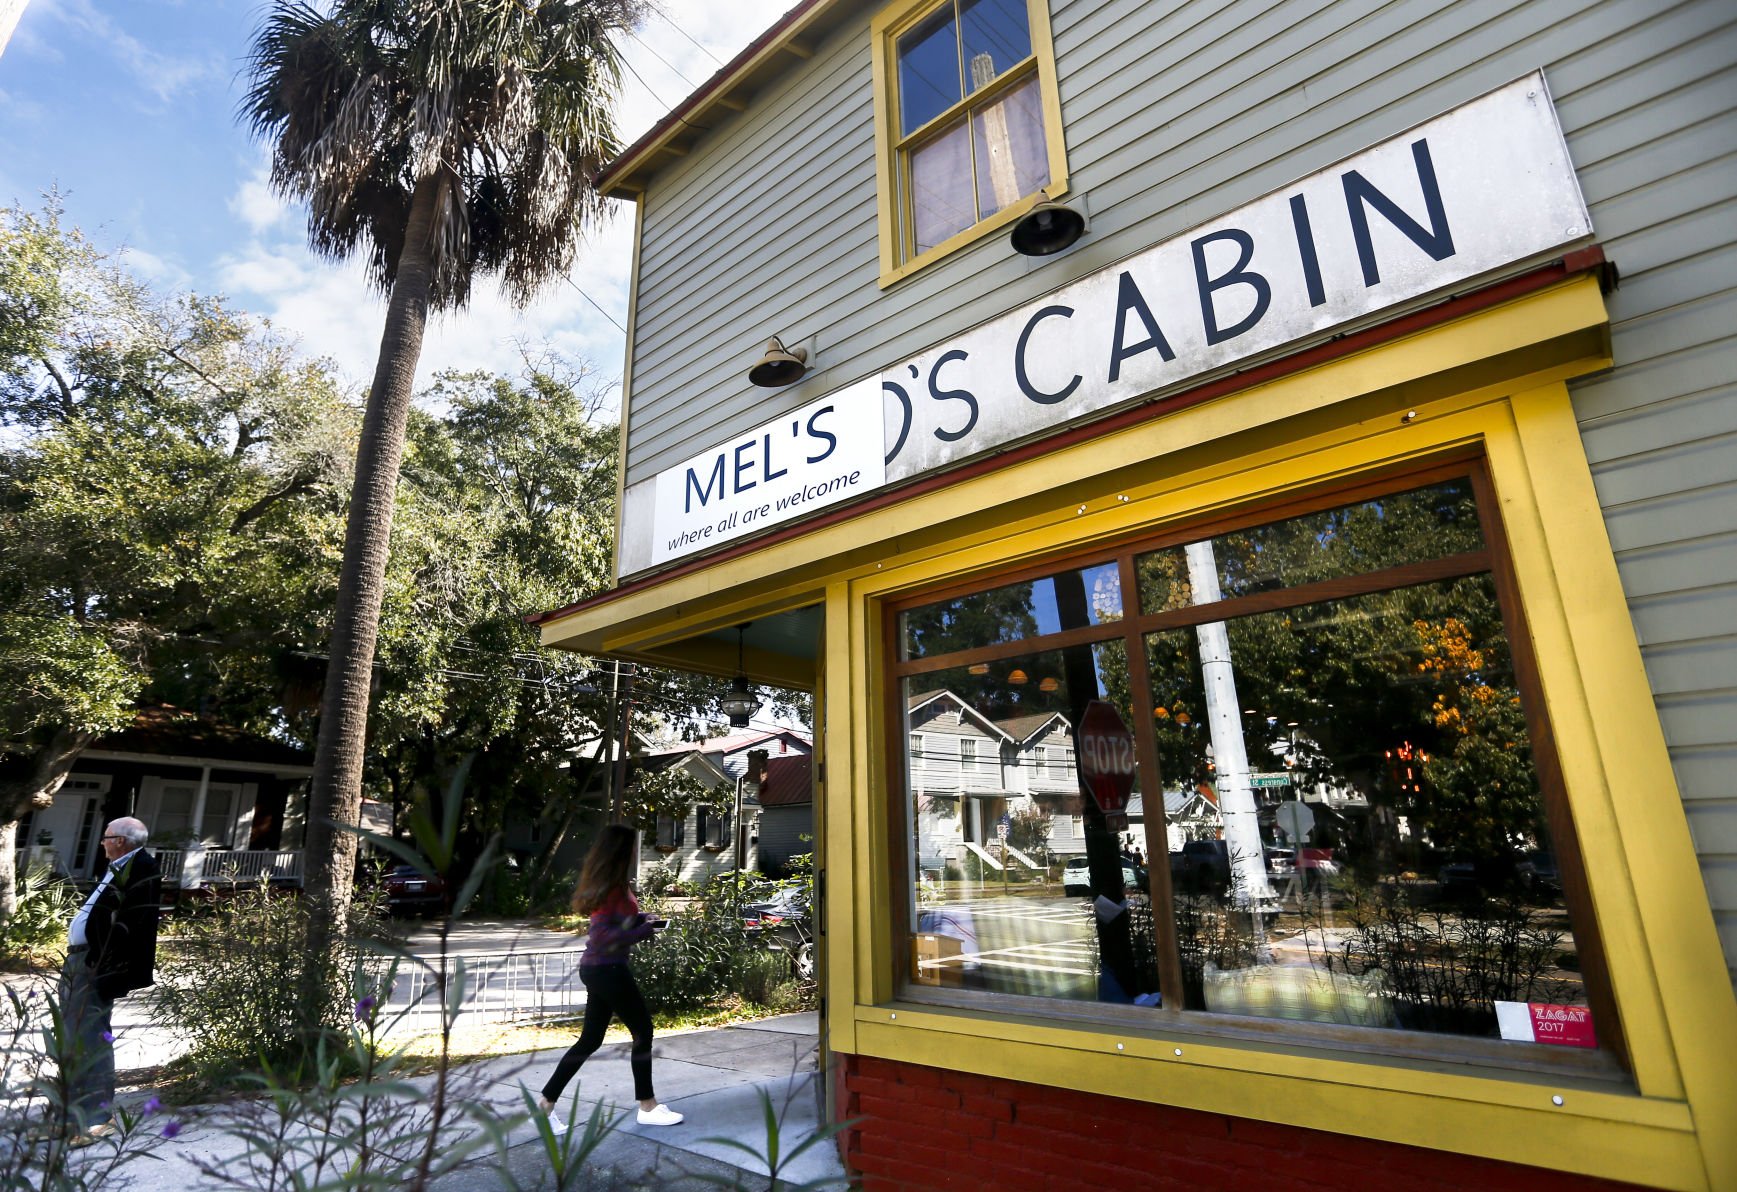 Charleston restaurant changes name temporarily to honor doctor